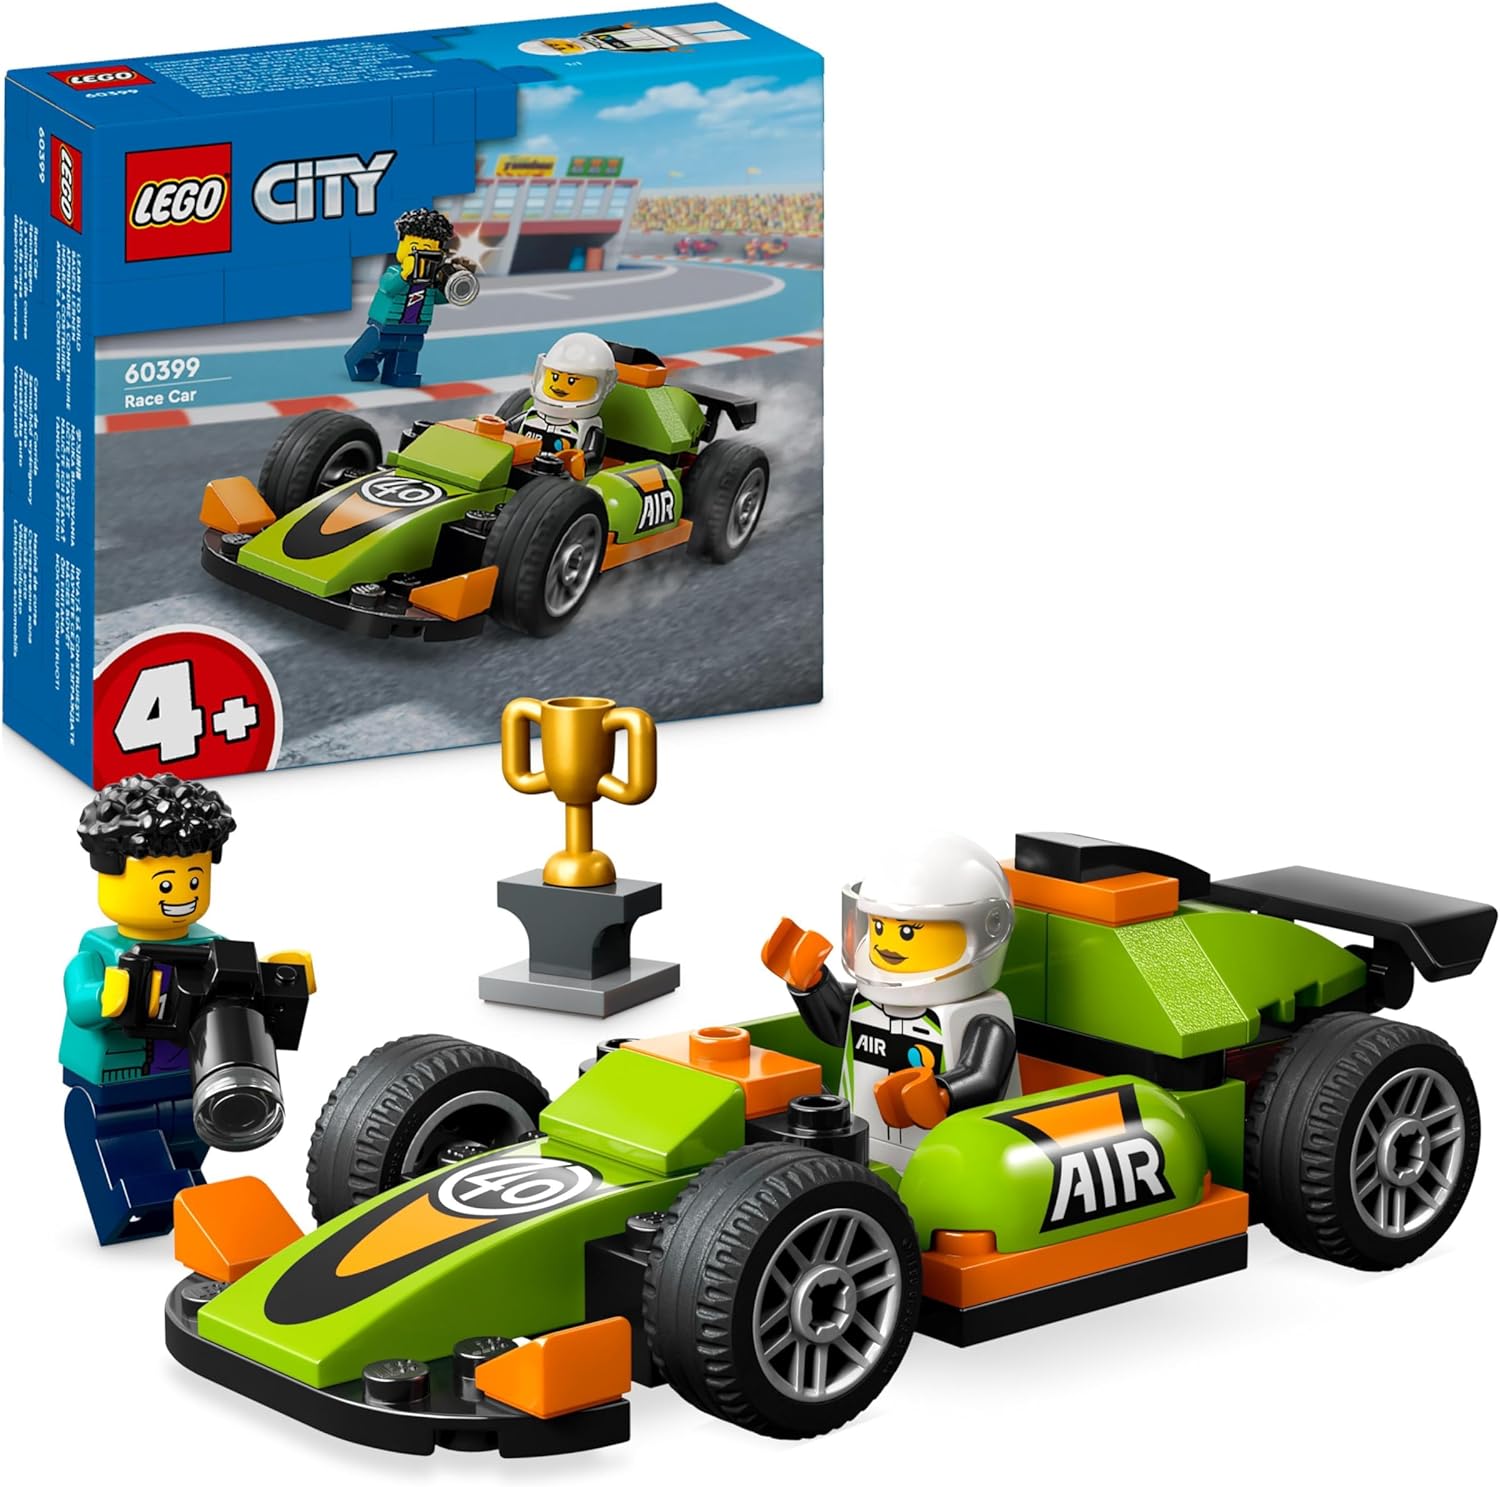 LEGO City Racing Car, Toy Racing Car, Classic Sports Car, Gift for Children, Car Construction Set for Boys and Girls from 4 Years with 2 Mini Figures, Including A Photographer and a Racer 60399